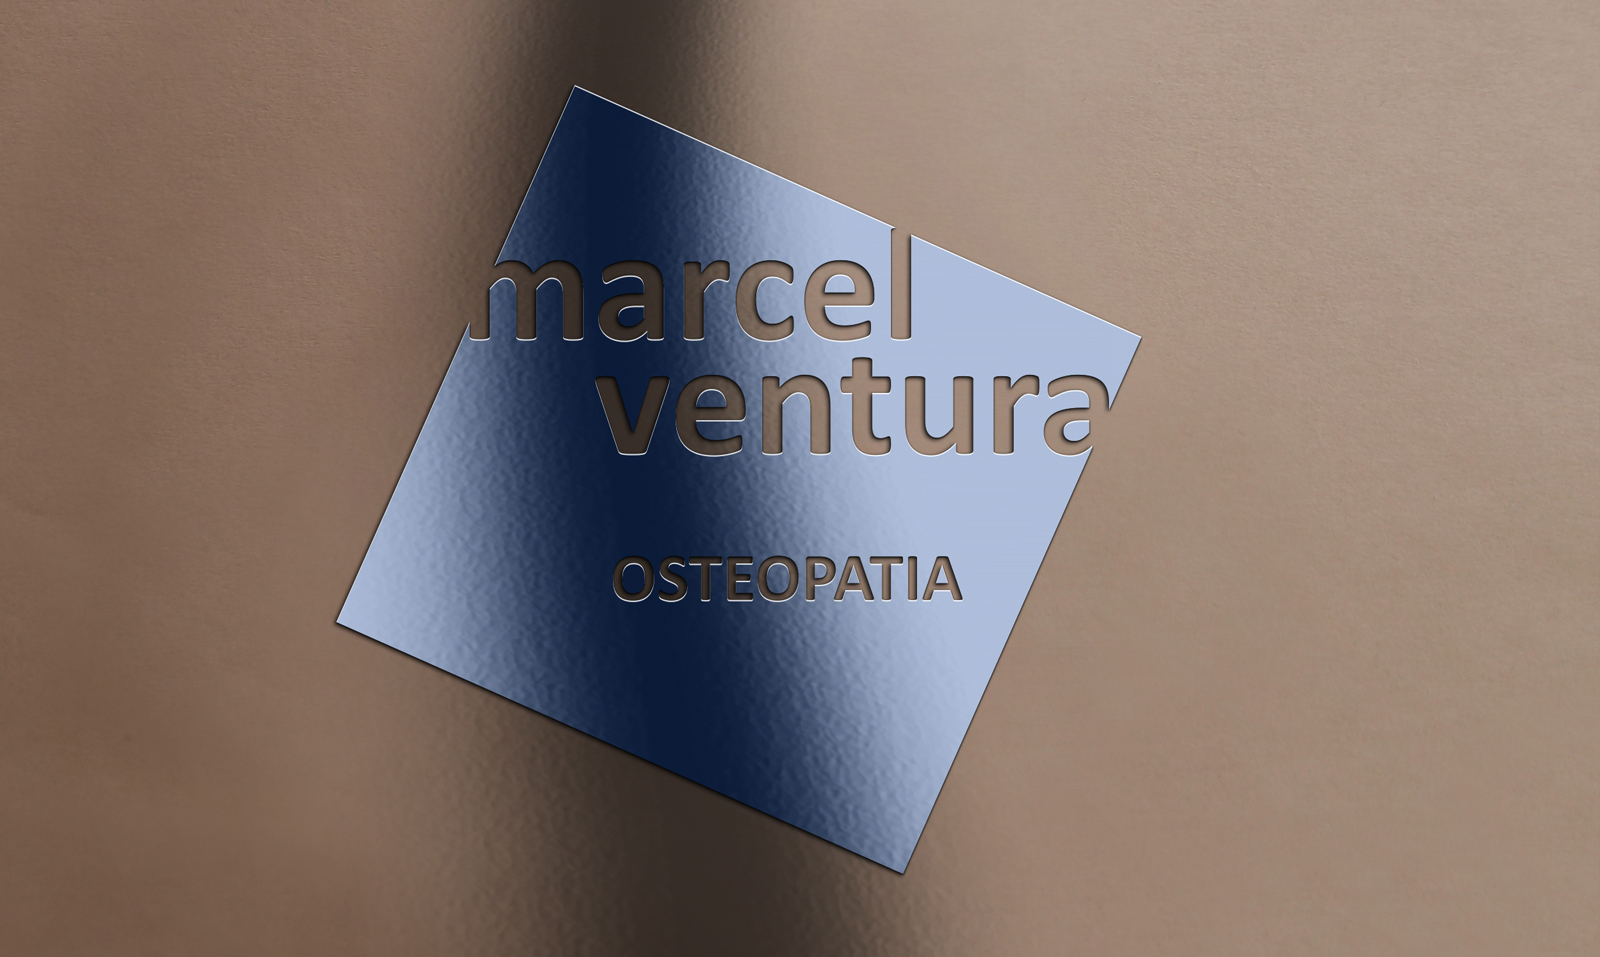 Portfolio of logo and brand design work for medical center specializing in osteopathy